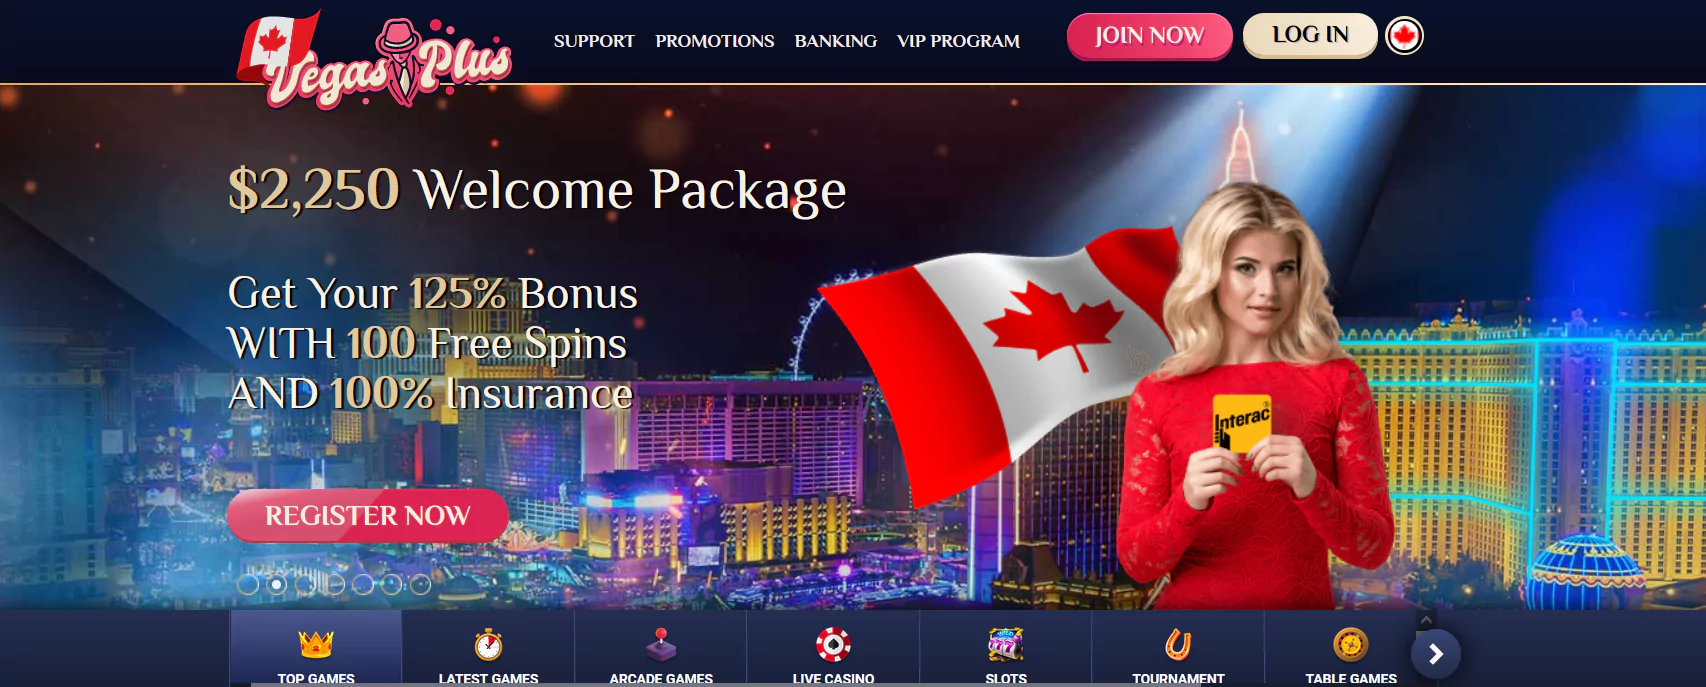 Screenshot of VegasPlus Casino Main Page from Official Website